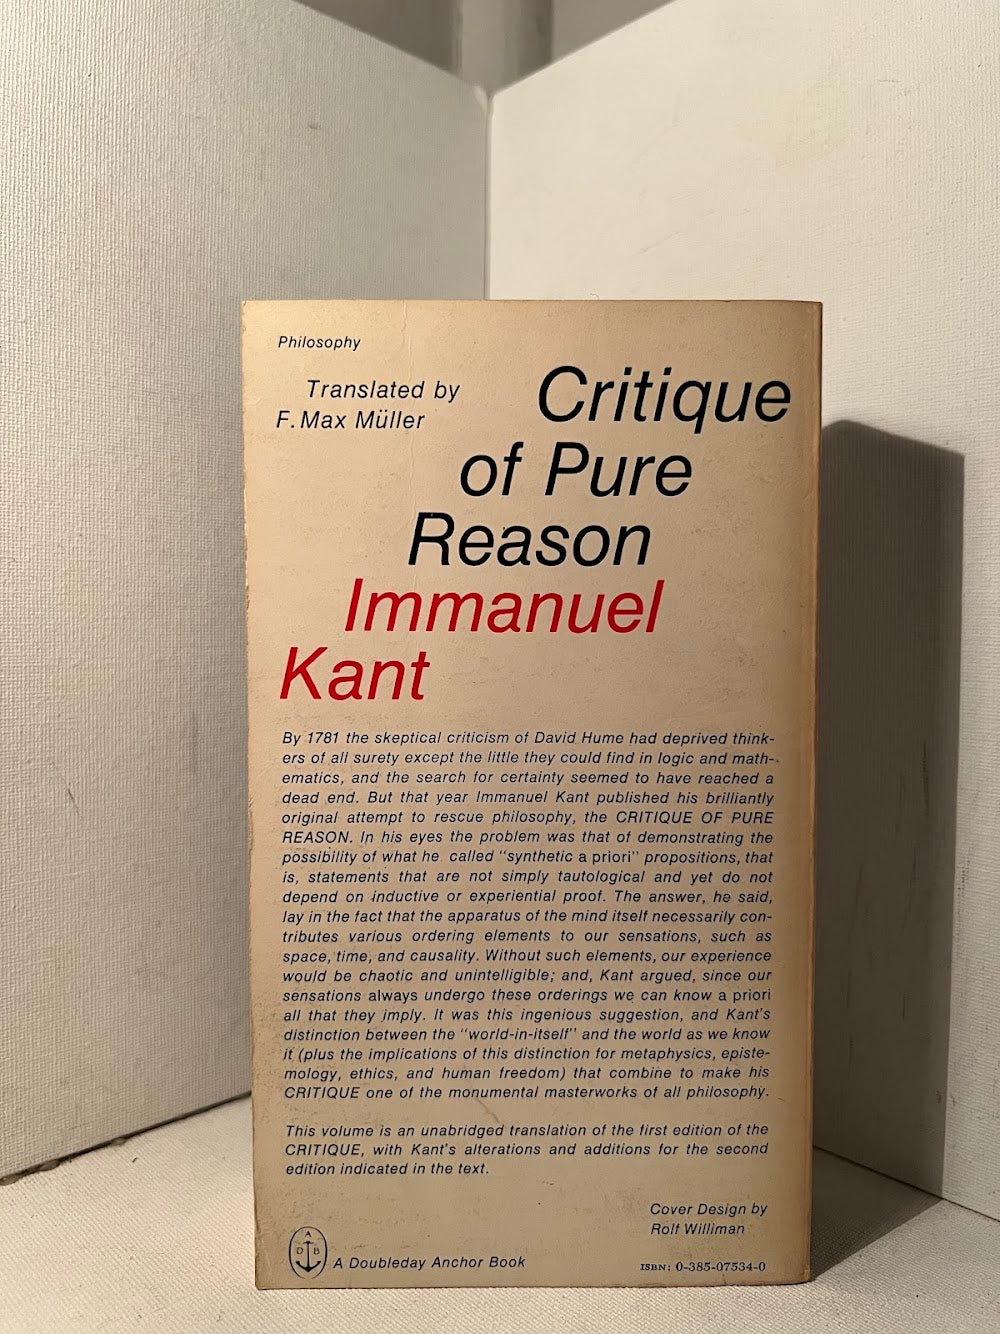 Critique of Pure Reason by Immanuel Kant